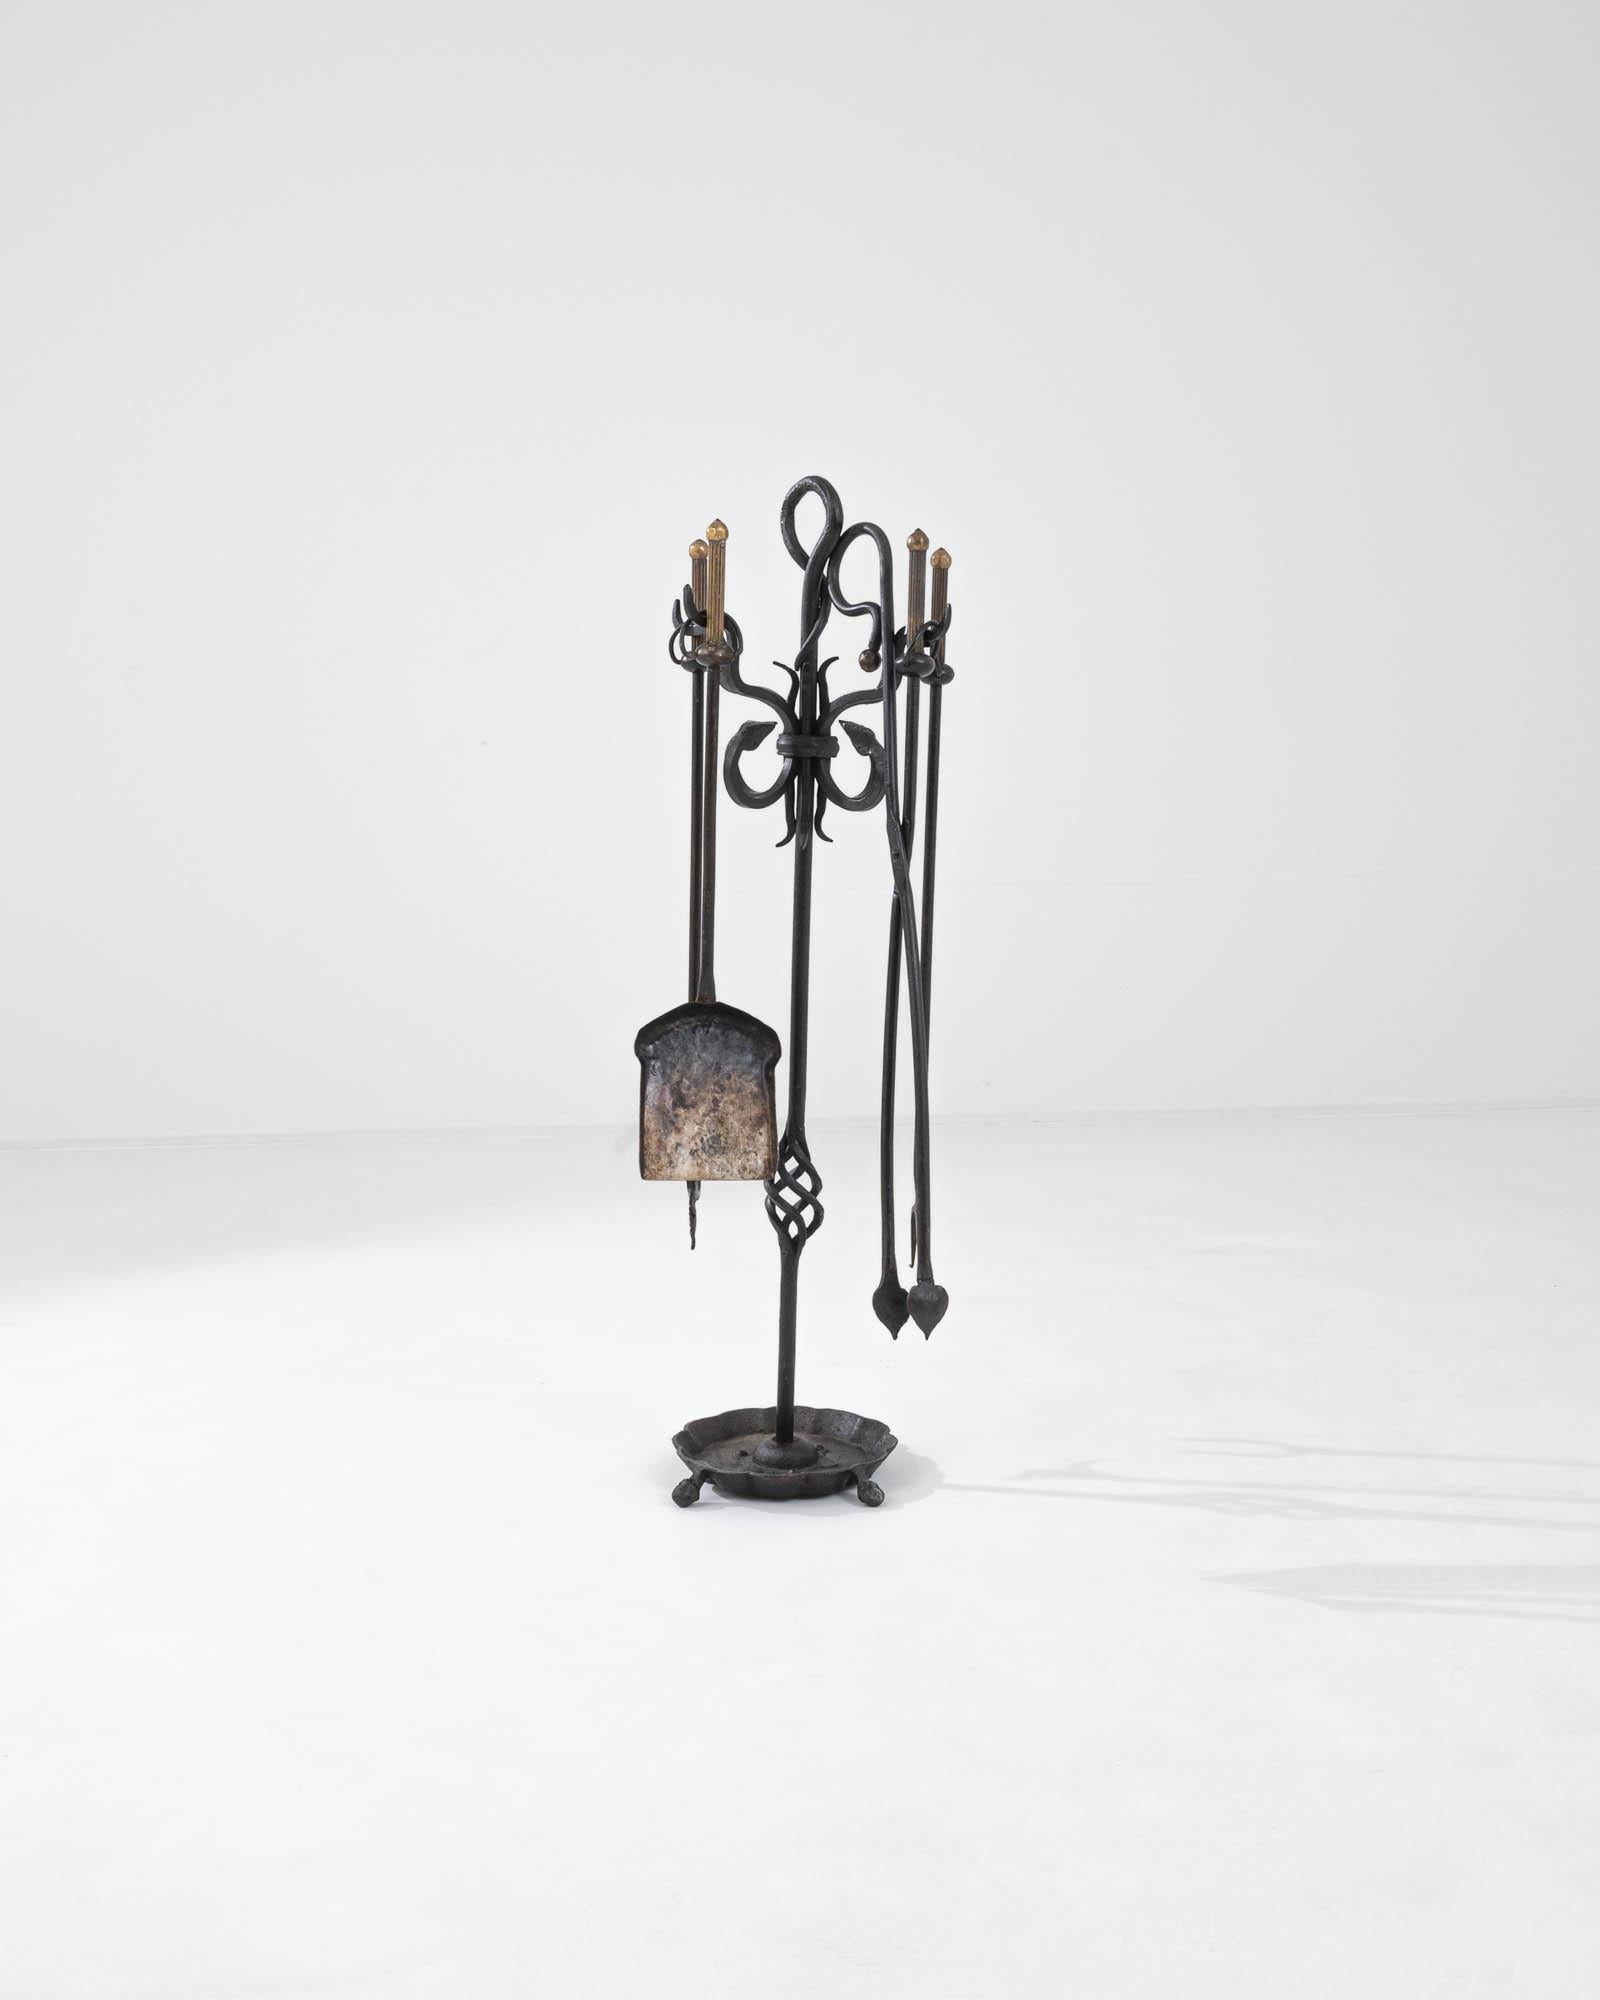 Combining the forms of traditional ironwork with graceful lines inspired by Art Nouveau, this vintage set of fireplace accessories offers a covetable home accent. Made in France in the 20th century, the central pole is embellished with an elegant